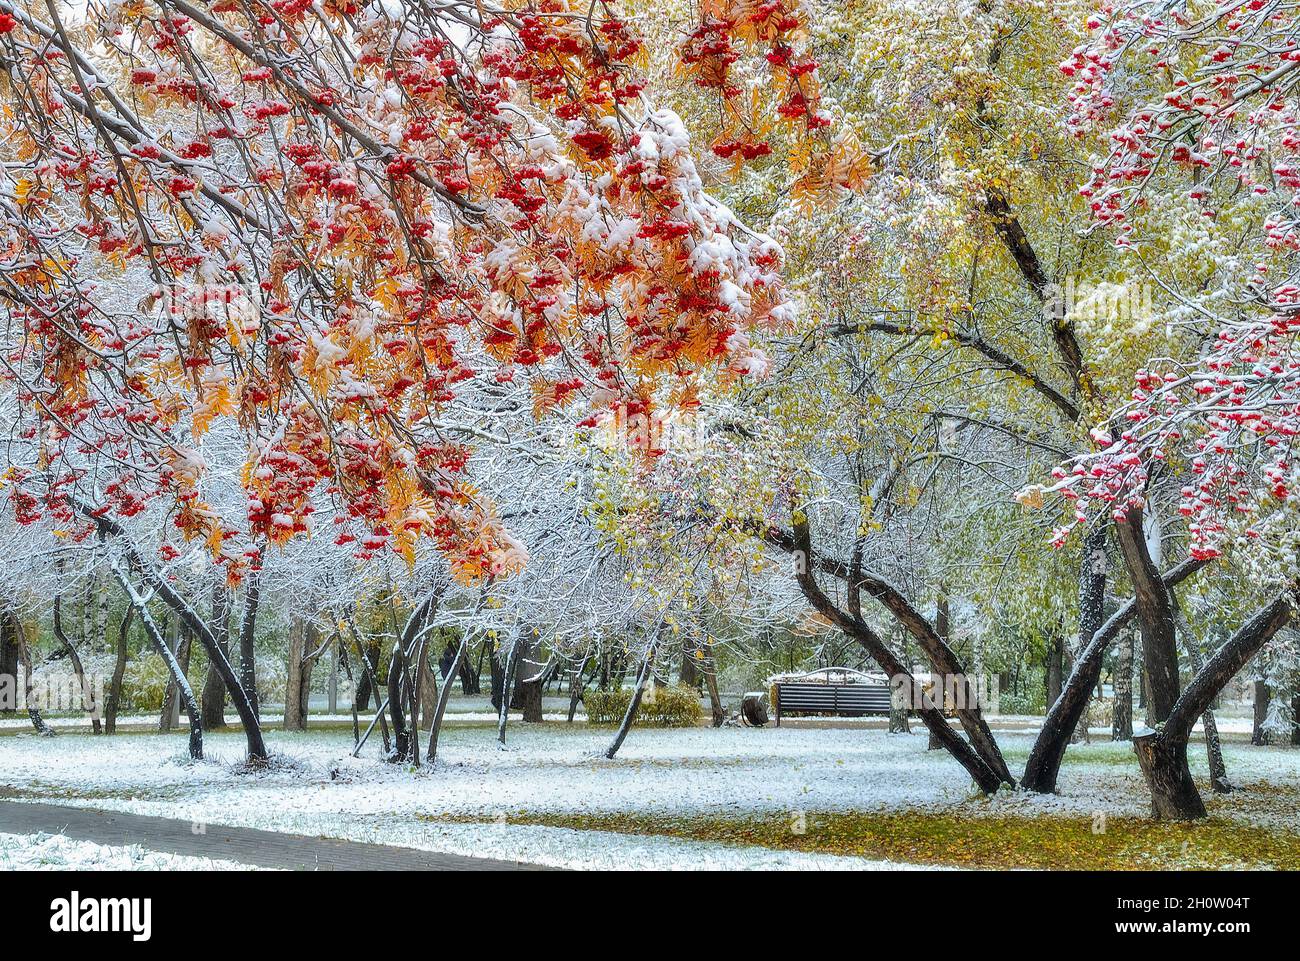 First snowfall in colorful fall city park - late autumn landscape. Rowan tree branch with red berries and golden foliage at foreground. Wonderful scen Stock Photo